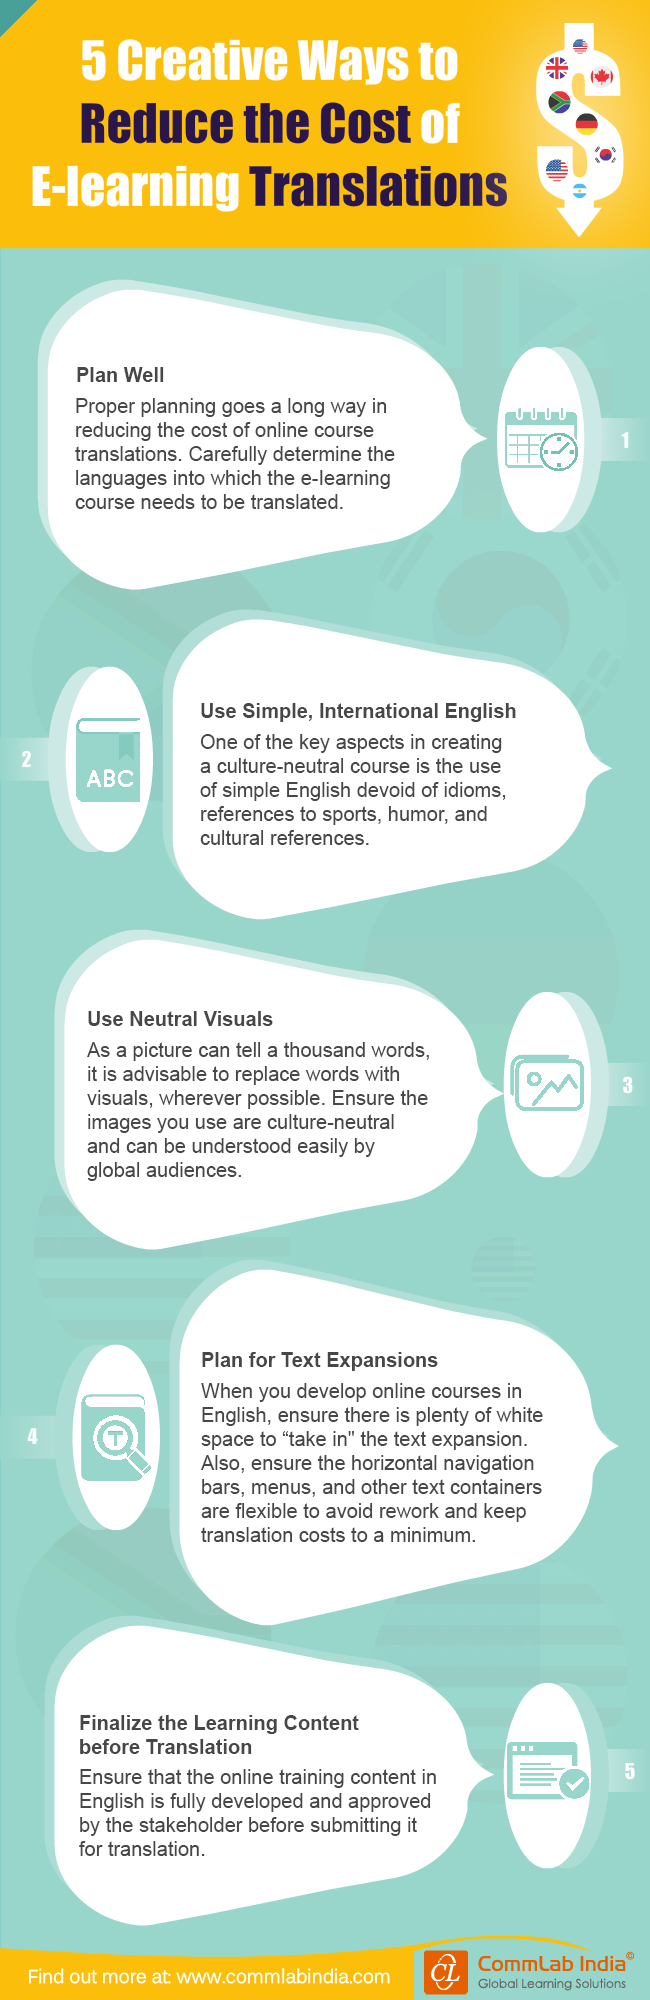 5 Creative Ways to Reduce the Cost of E-learning Translations [Infographic]